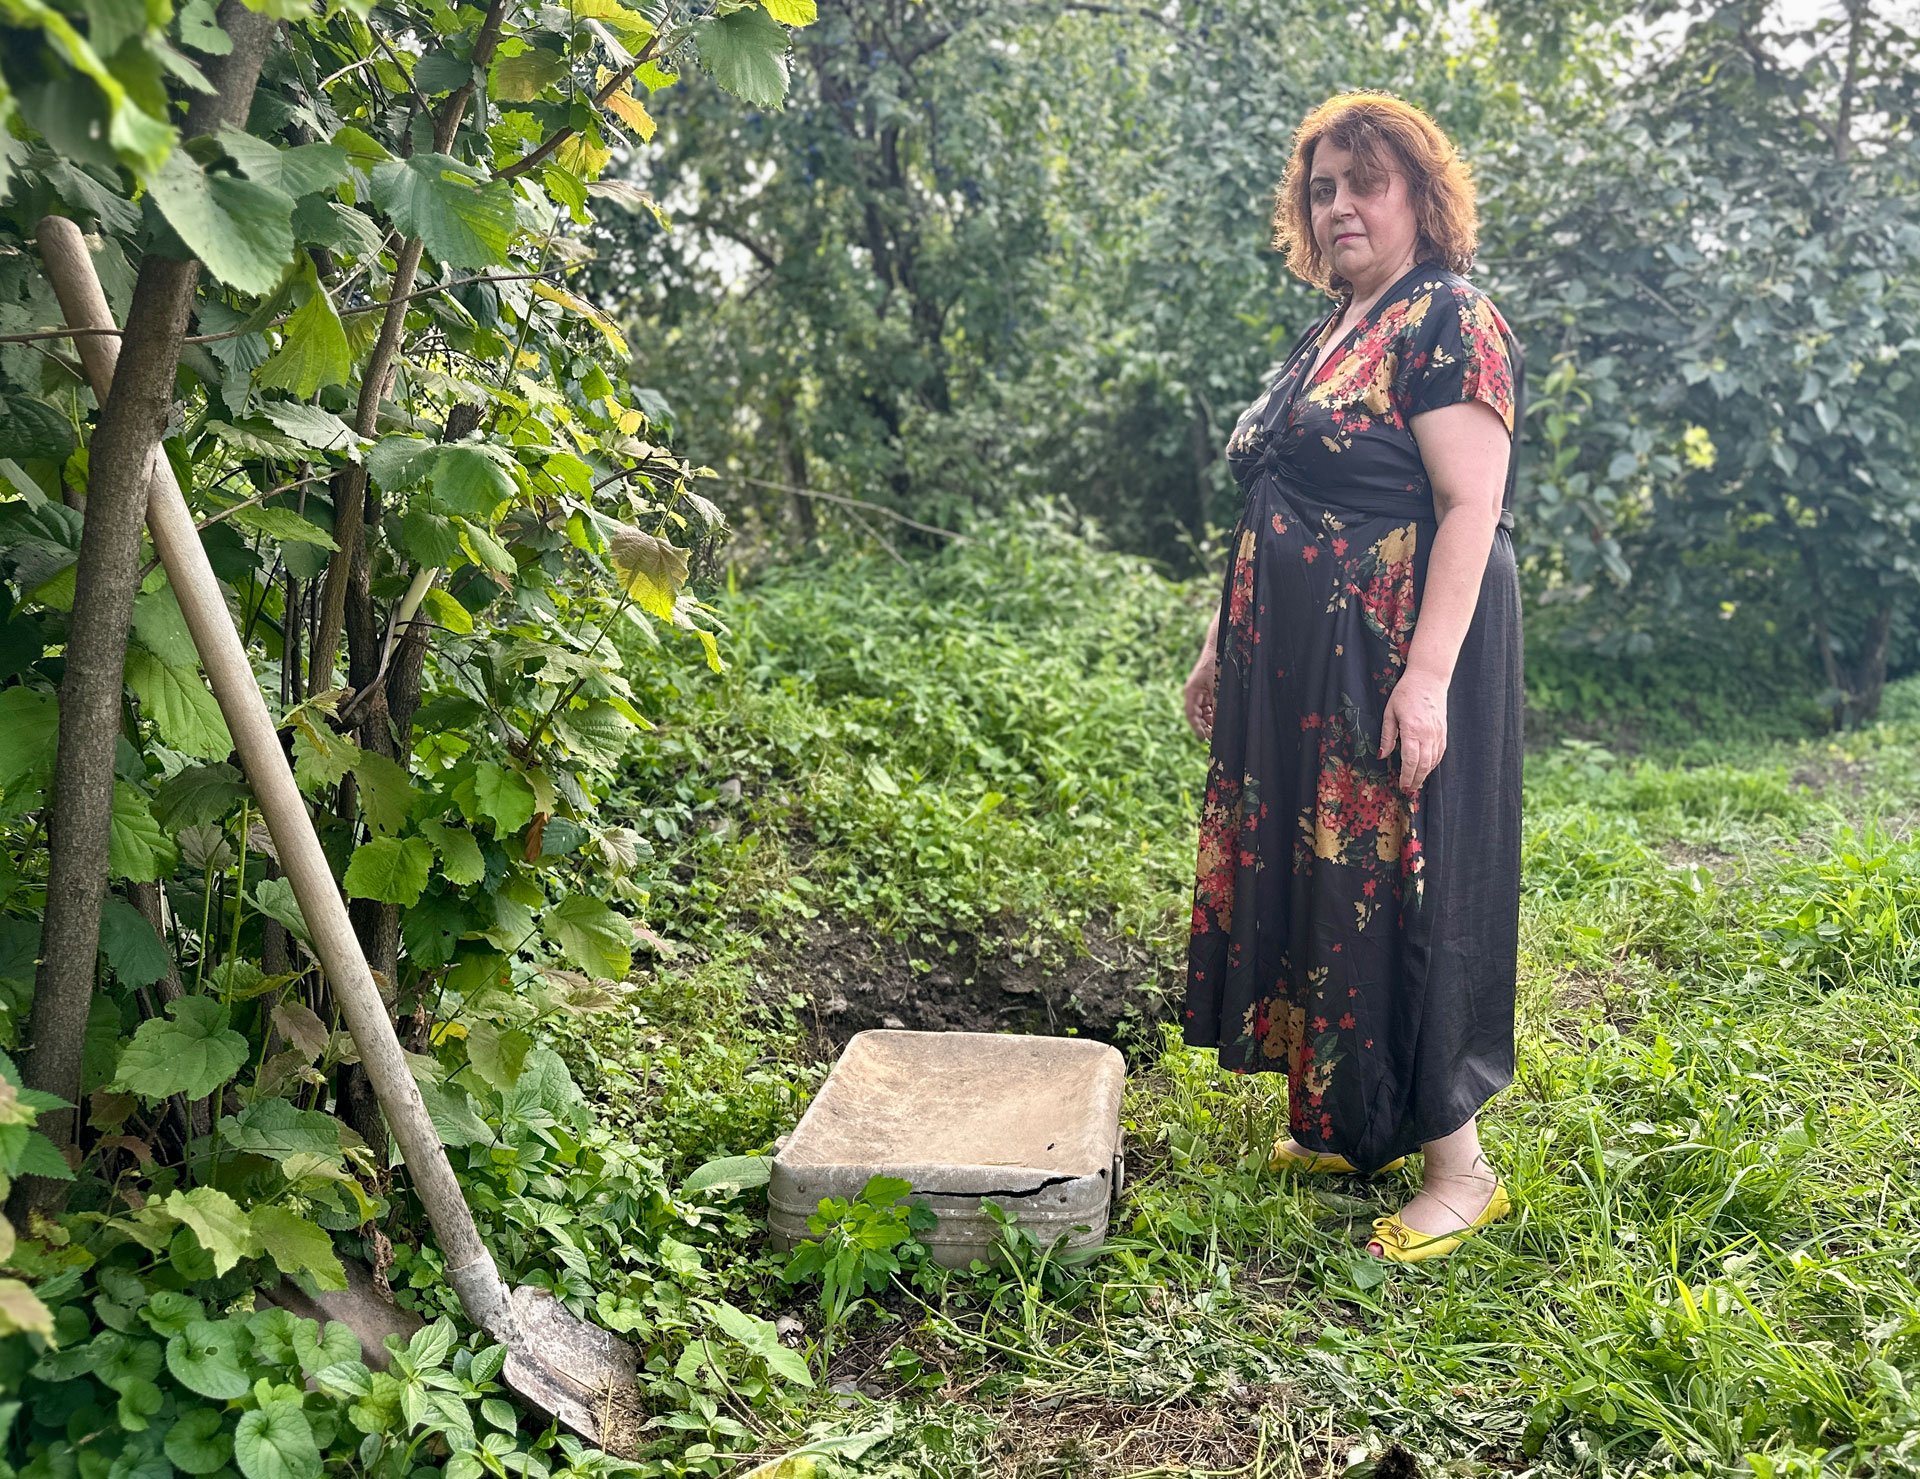 Irina's daughter Nino Elizbarashvili stands next to a suitcase and a shovel in the garden